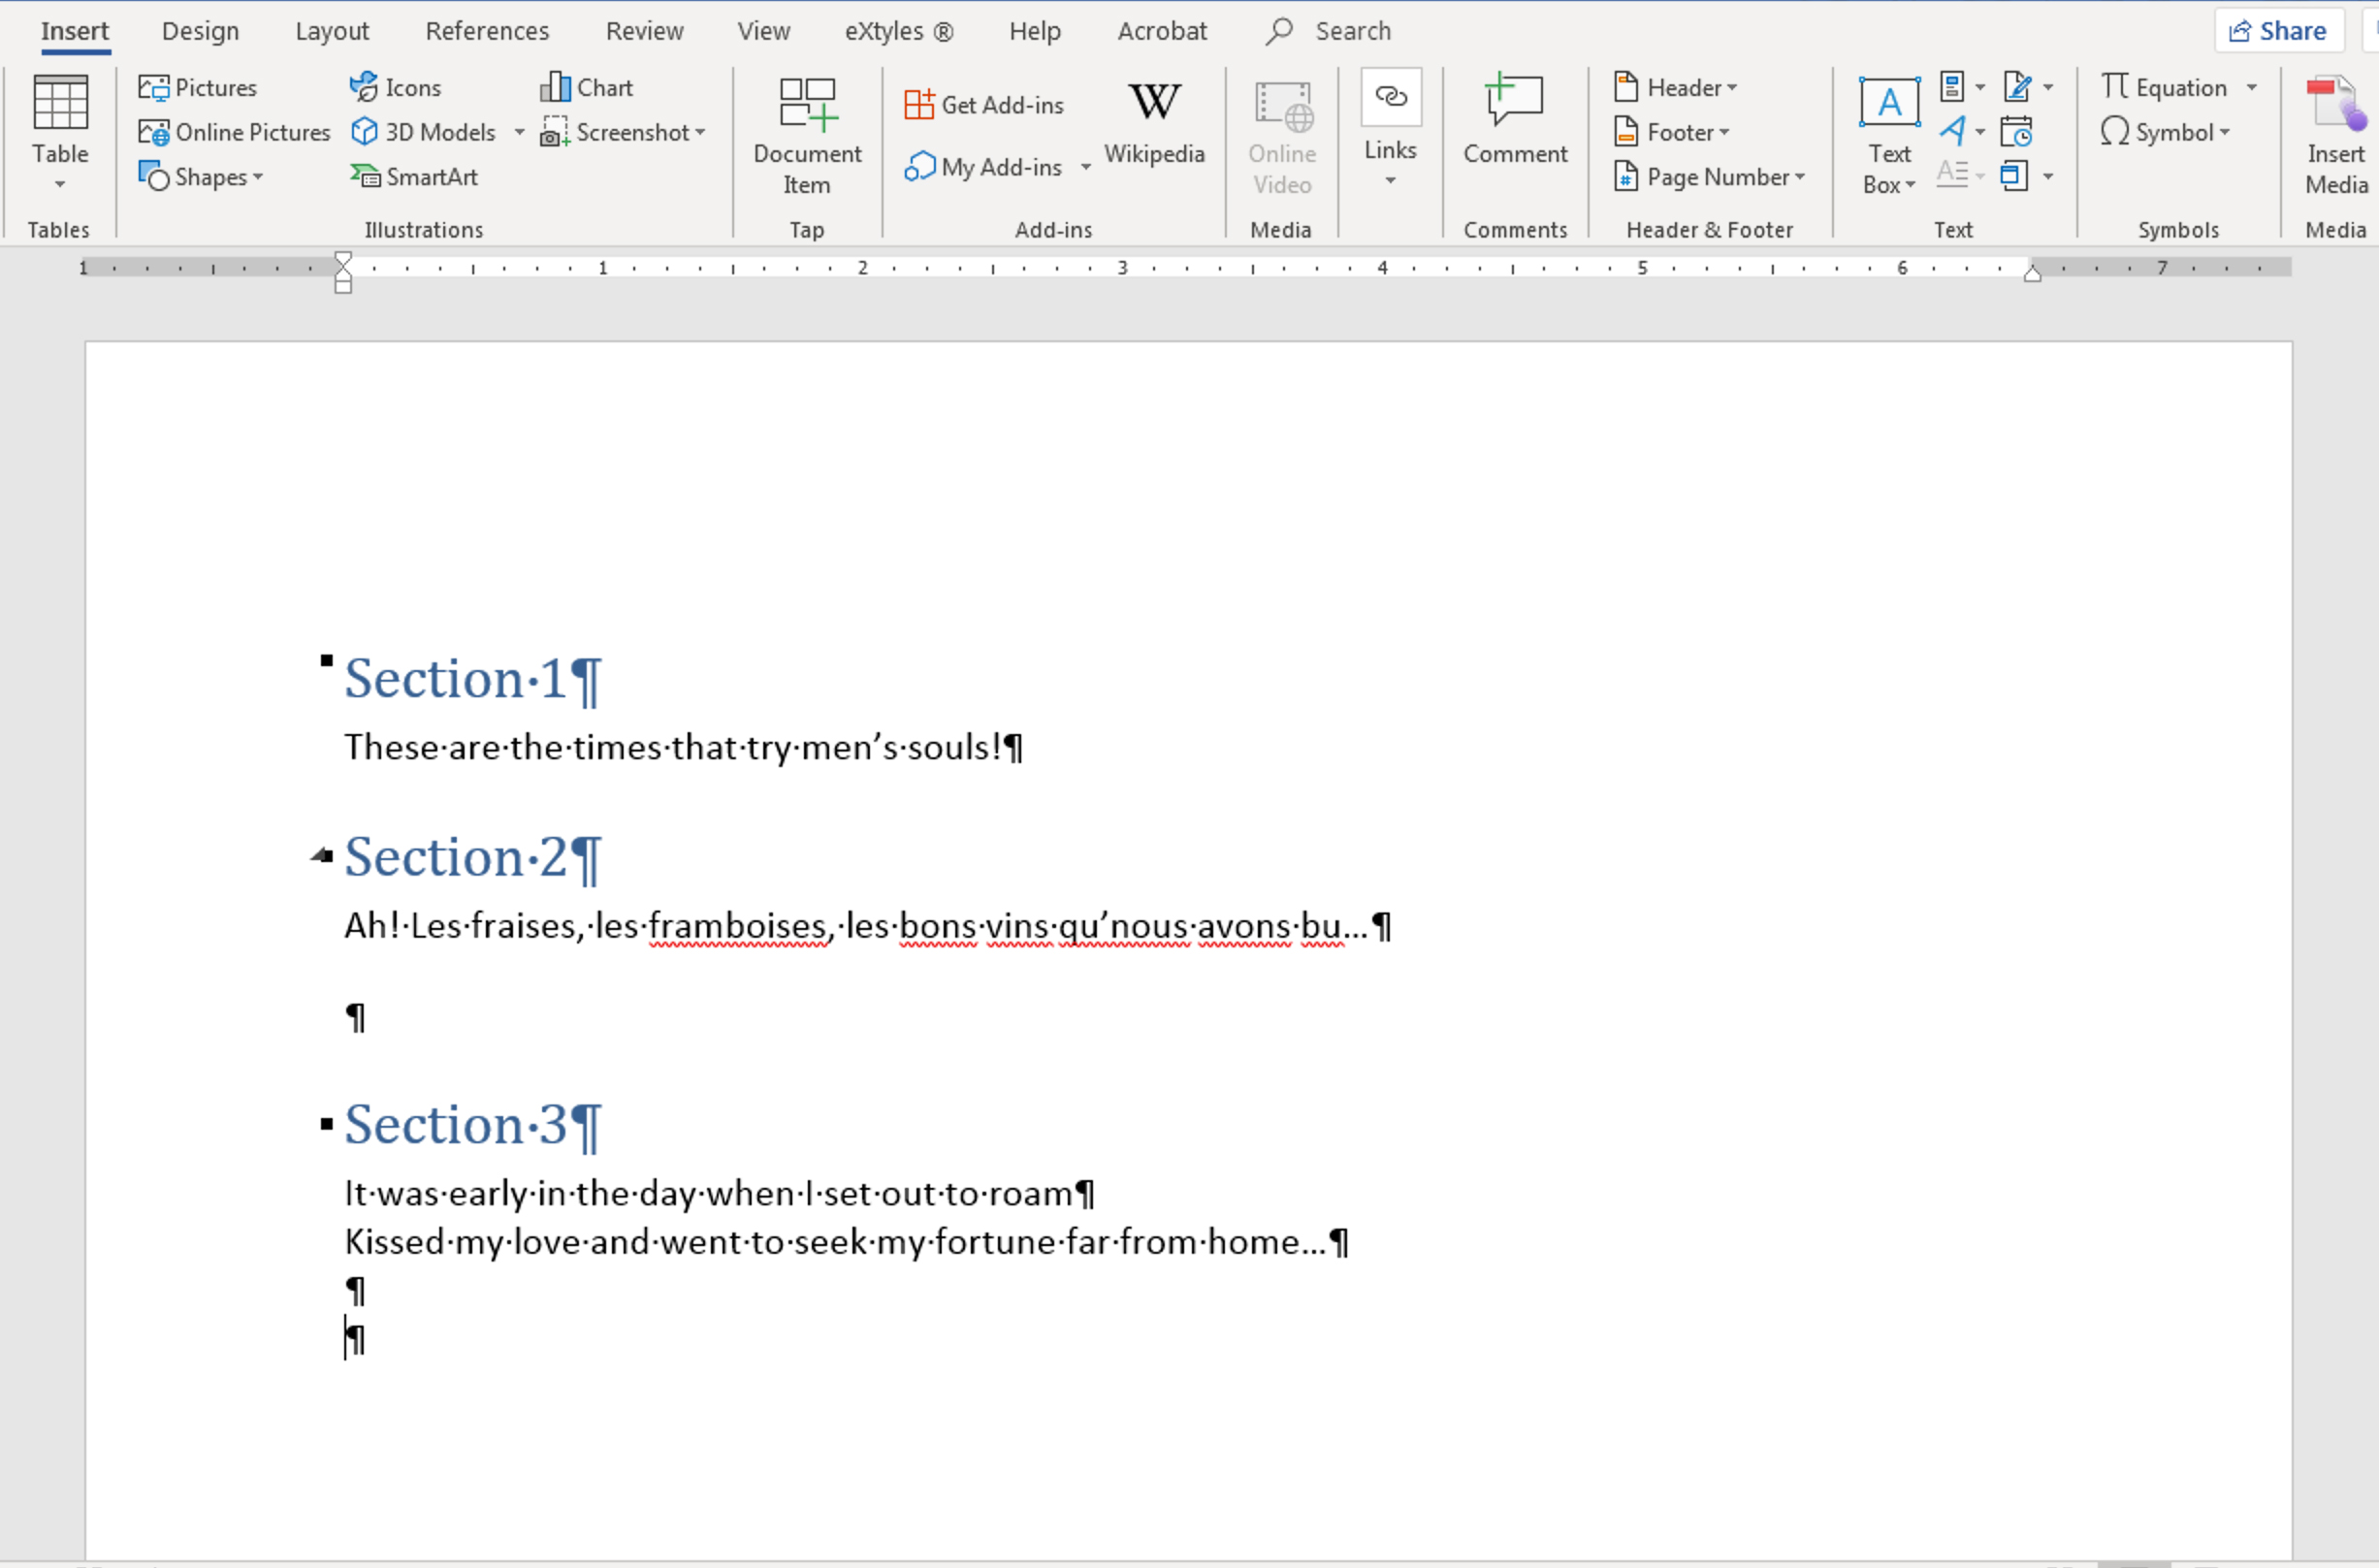 Screenshot: Microsoft Word document showing text inserted from 3 different files